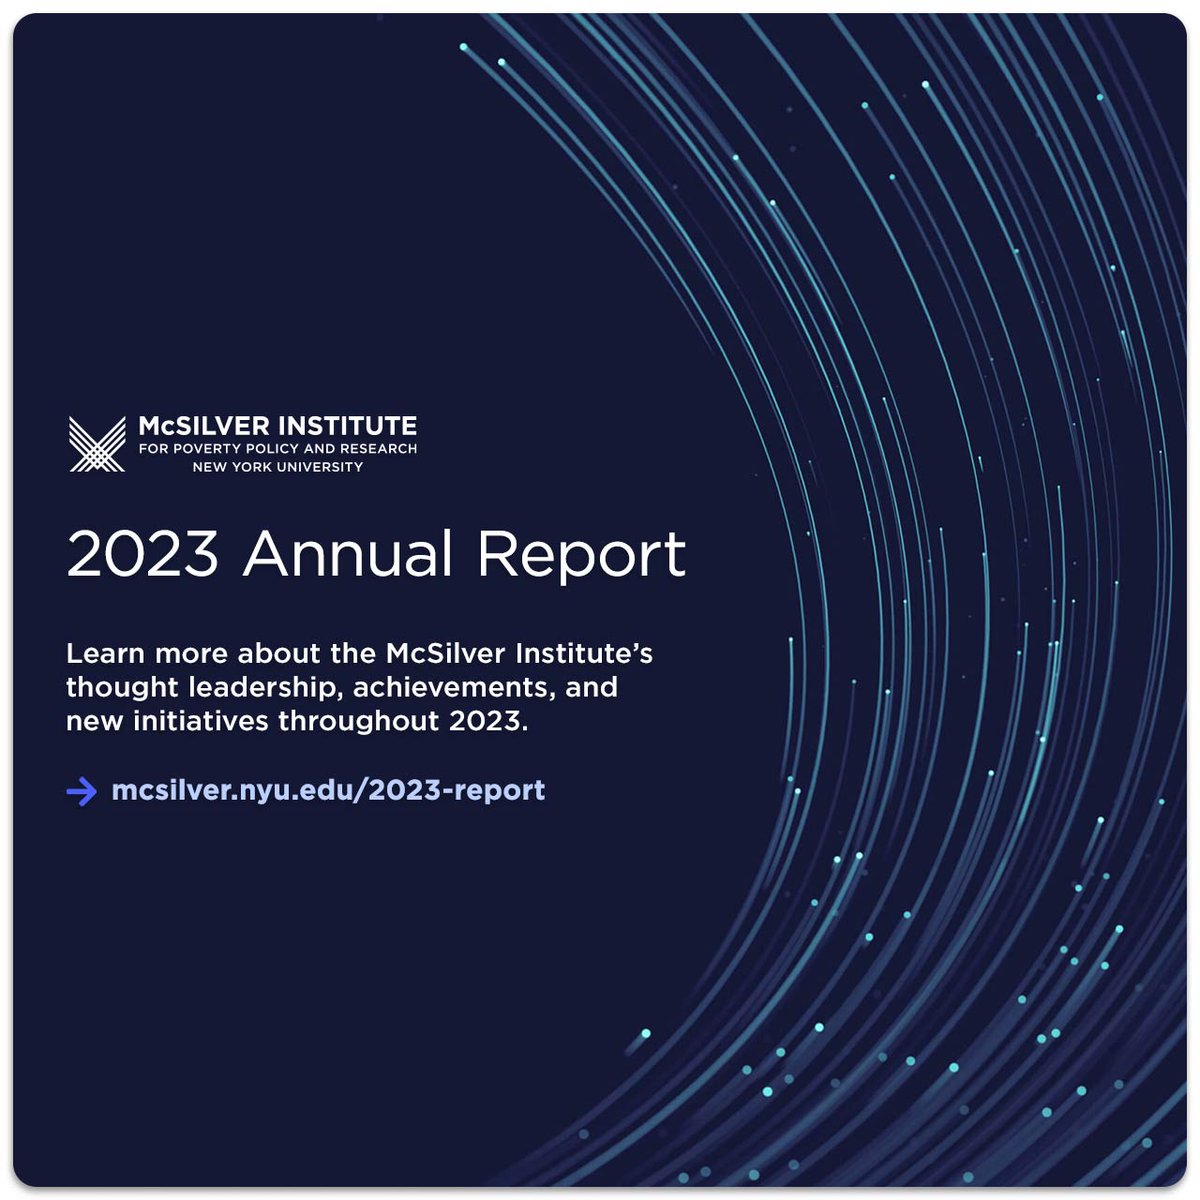 The McSilver Institute’s 2023 Annual Report is available online! Learn more about the Institute’s thought leadership, achievements, and new initiatives throughout the year: mcsilver.nyu.edu/2023-report